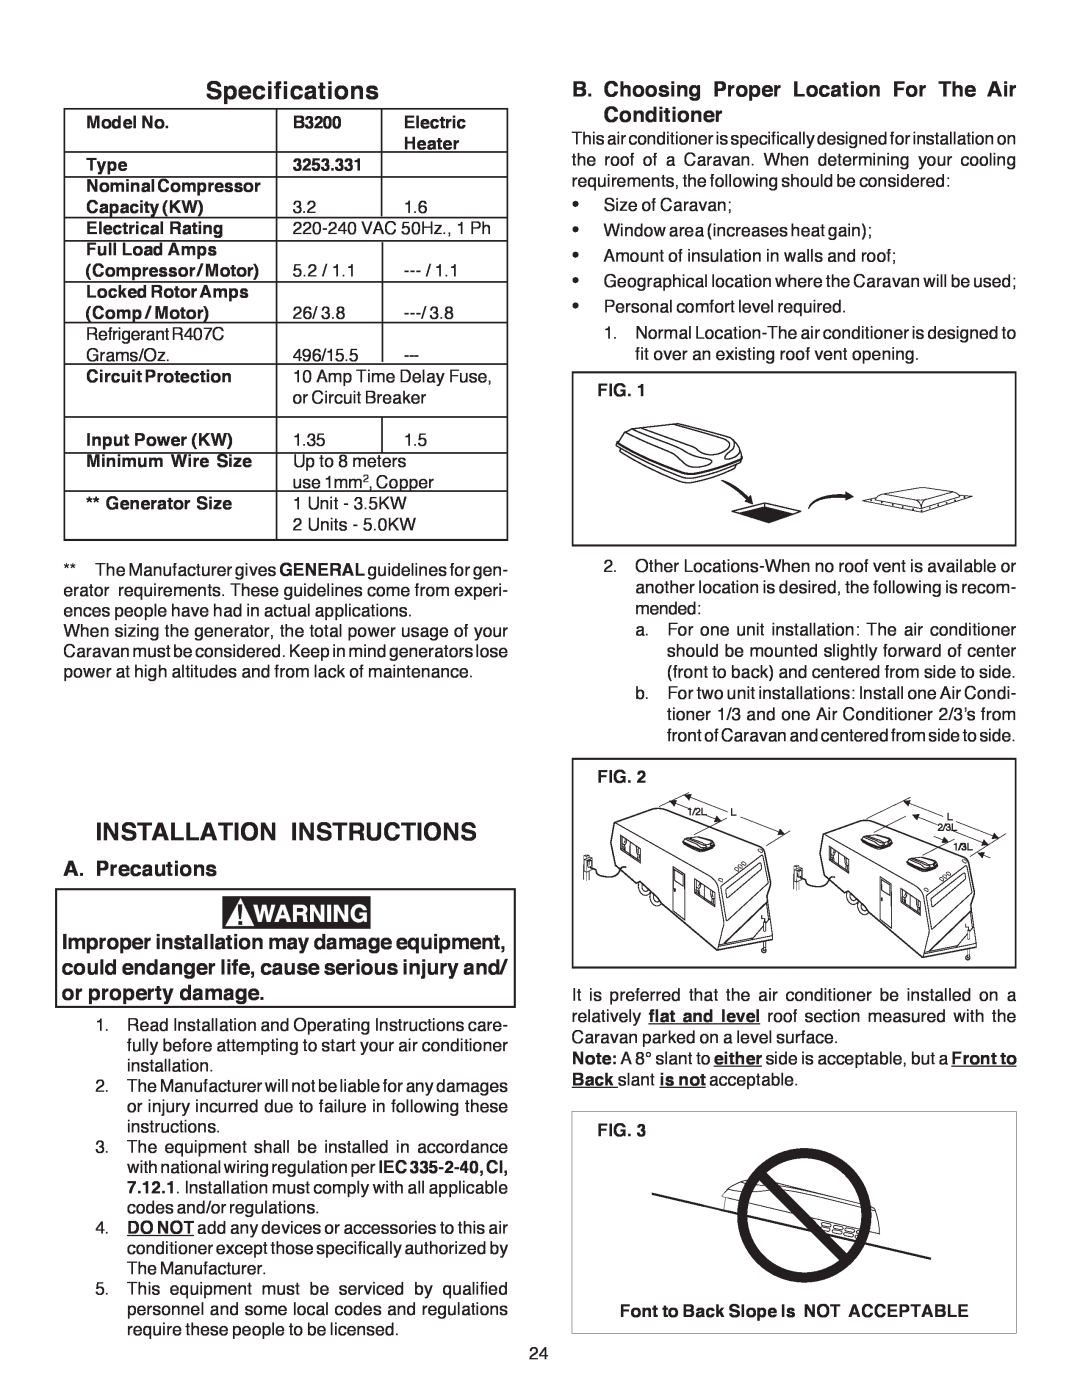 Dometic B3200 manual Specifications, Installation Instructions 